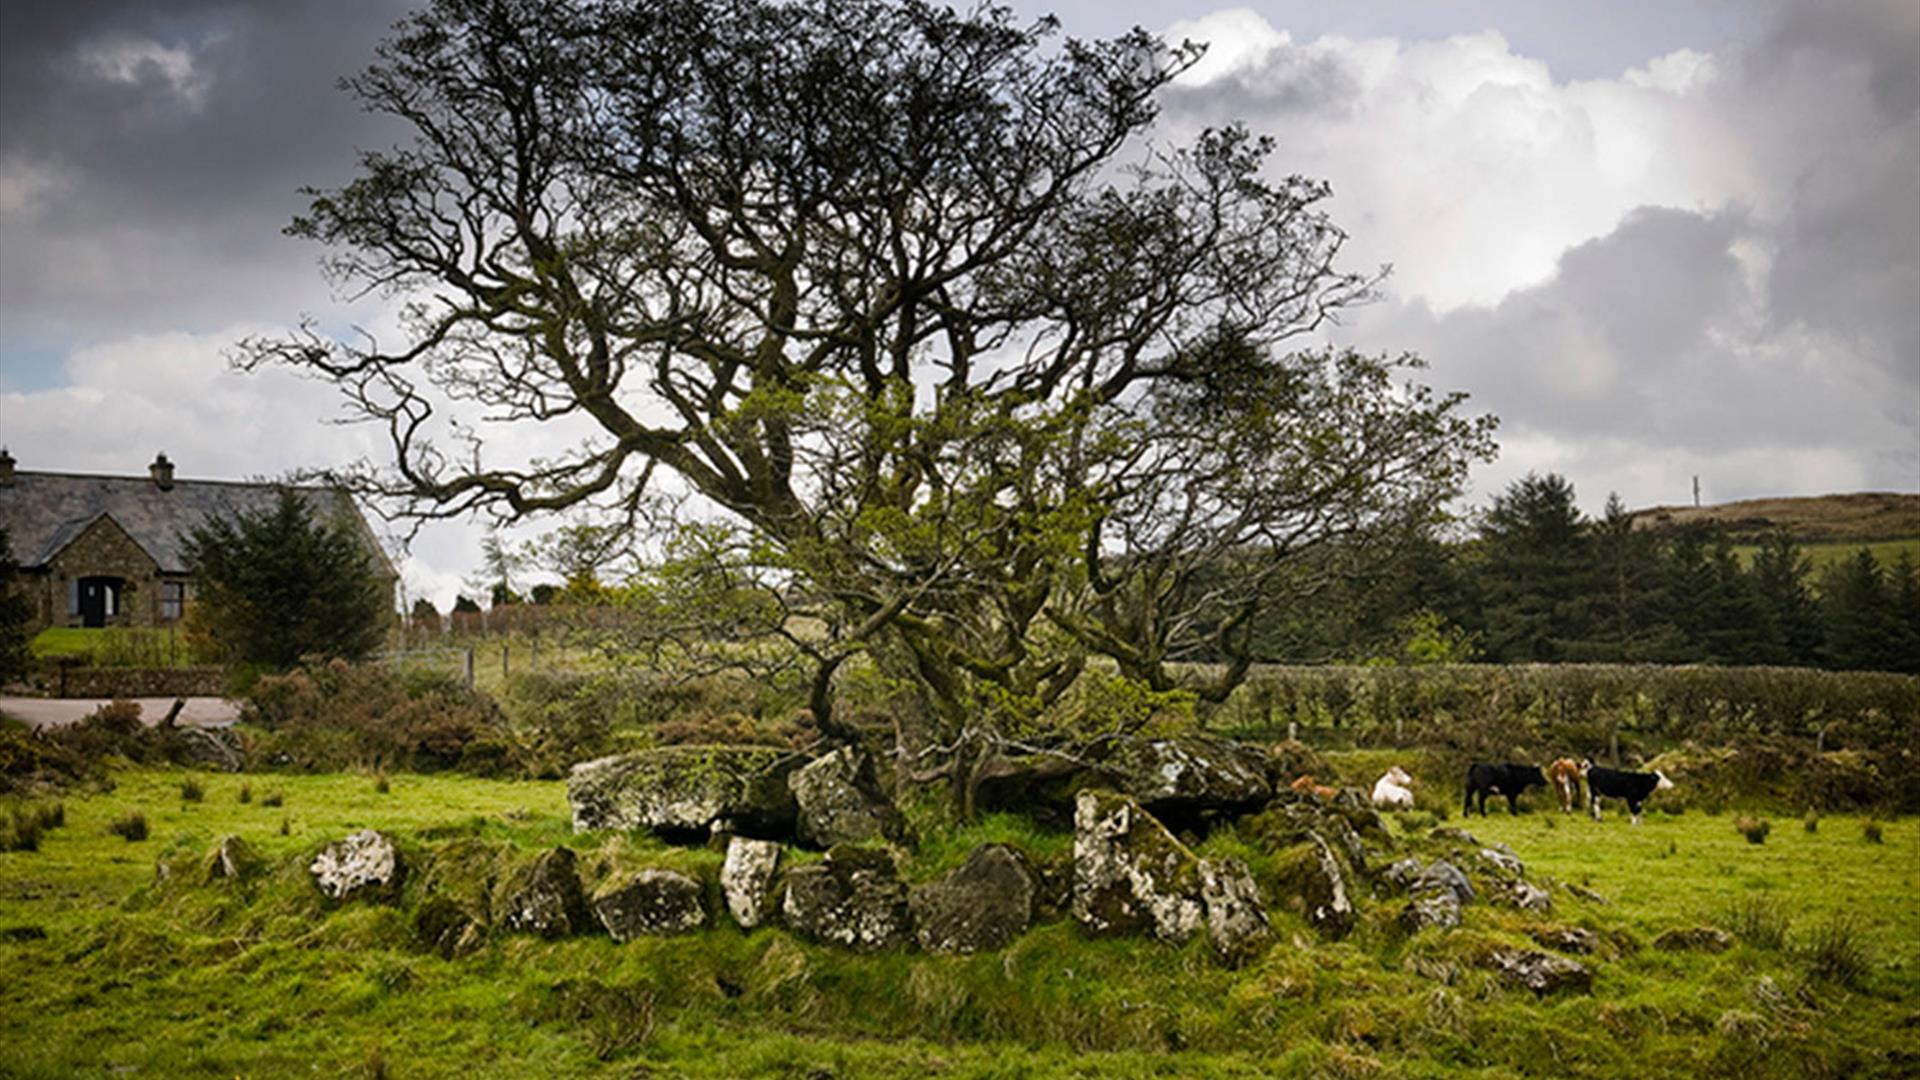 Loughmacrory Wedge Tomb